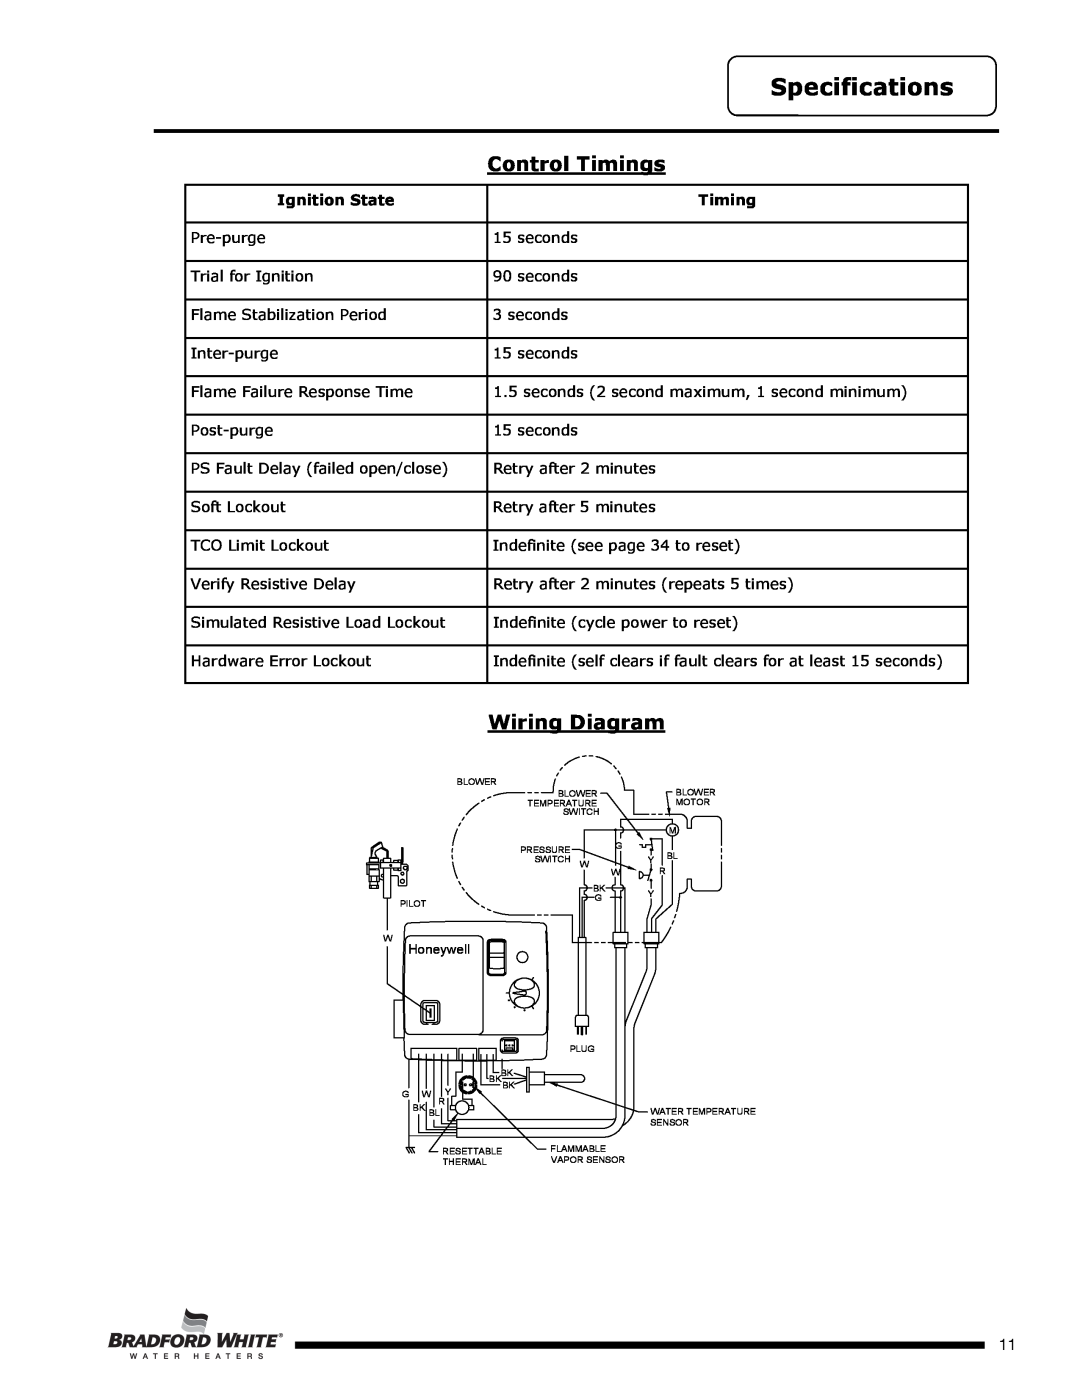 Bradford-White Corp U1TW60T*FRN, UTW450S60FR*N Control Timings, Wiring Diagram, Specifications, Page, Ignition State 